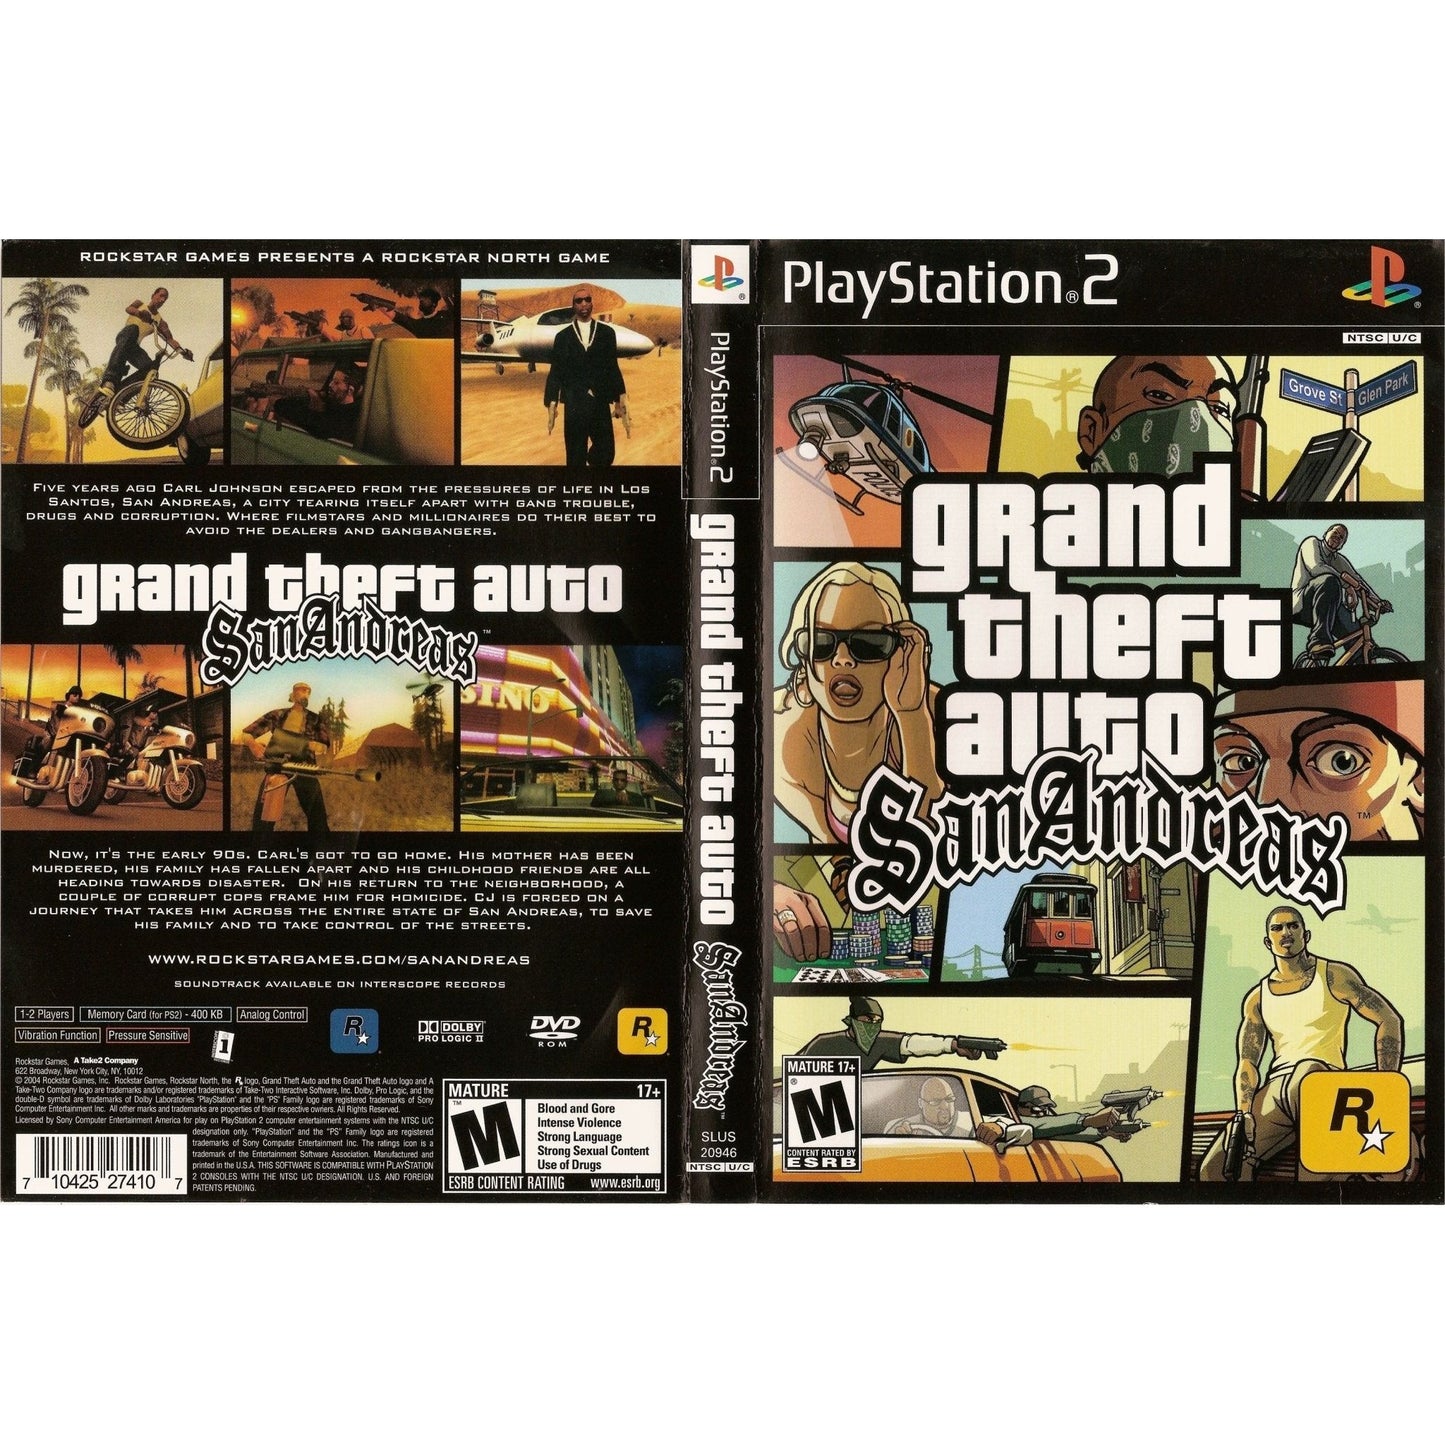 Grand Theft Auto - San Andreas (Bonus) ROM (ISO) Download for Sony  Playstation 2 / PS2 